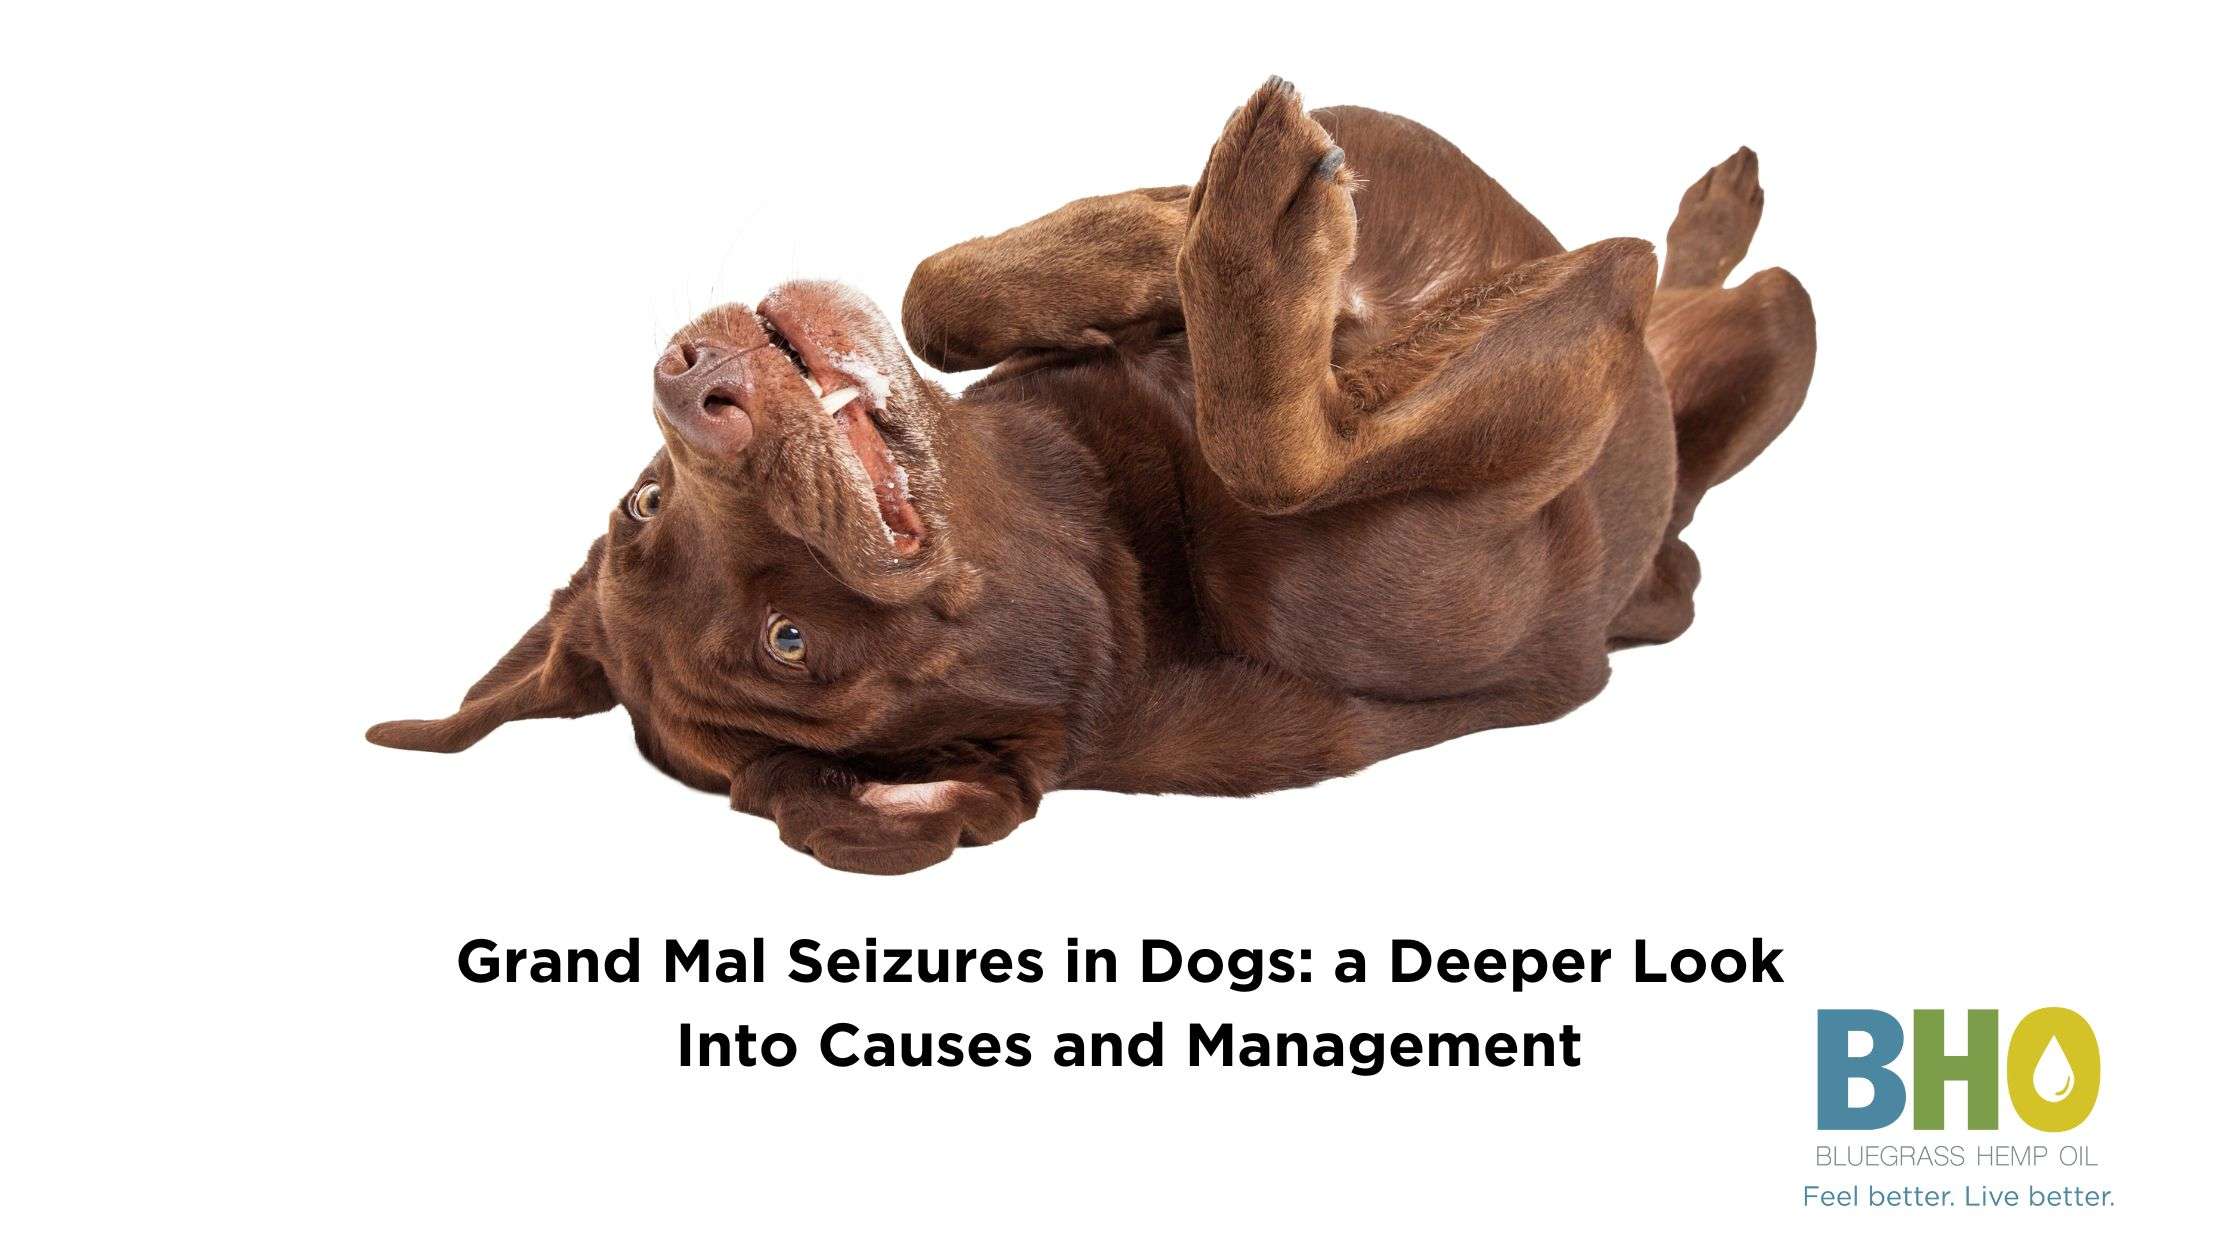 A chocolate Labrador lying on its back, exhibiting signs of a grand mal seizure, in a controlled environment for educational purposes.